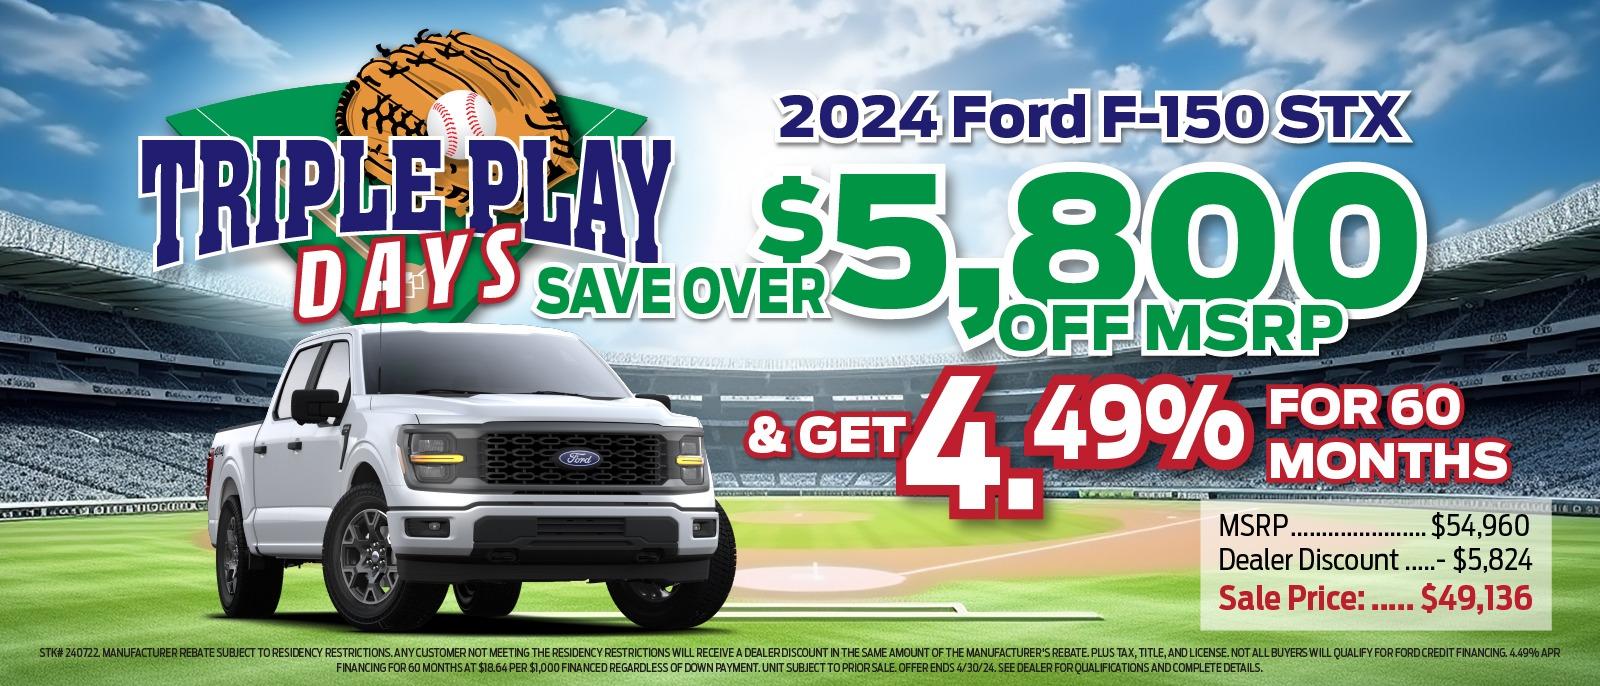 2024 Ford F-150 TRIPLE PLAY $ DAYS SAVE OVER $5,800 OFF MSRP & GET 4.49% FOR 60 MONTHS  MSRP. .$54,960 Dealer Discount ....- $5,824 Sale Price : .... . $49,139 STK# 240722. MANUFACTURER REBATE SUBJECT TO RESIDENCY RESTRICTIONS. ANY CUSTOMER NOT MEETING THE RESIDENCY RESTRICTIONS WILL RECEIVE A DEALER DISCOUNT IN THE SAME AMOUNT OF THE MANUFACTURER'S REBATE. PLUS TAX, TITLE, AND LICENSE. NOT ALL BUYERS WILL QUALIFY FOR FORD CREDIT FINANCING.4.49% APR FINANCING FOR 60 MONTHS AT $18.64 PER $1,000 FINANCED REGARDLESS OF DOWN PAYMENT.  UNIT SUBJECT TO PRIOR SALE. OFFER ENDS 4/30/24. SEE DEALER FOR QUALIFICATIONS AND COMPLETE DETAILS.